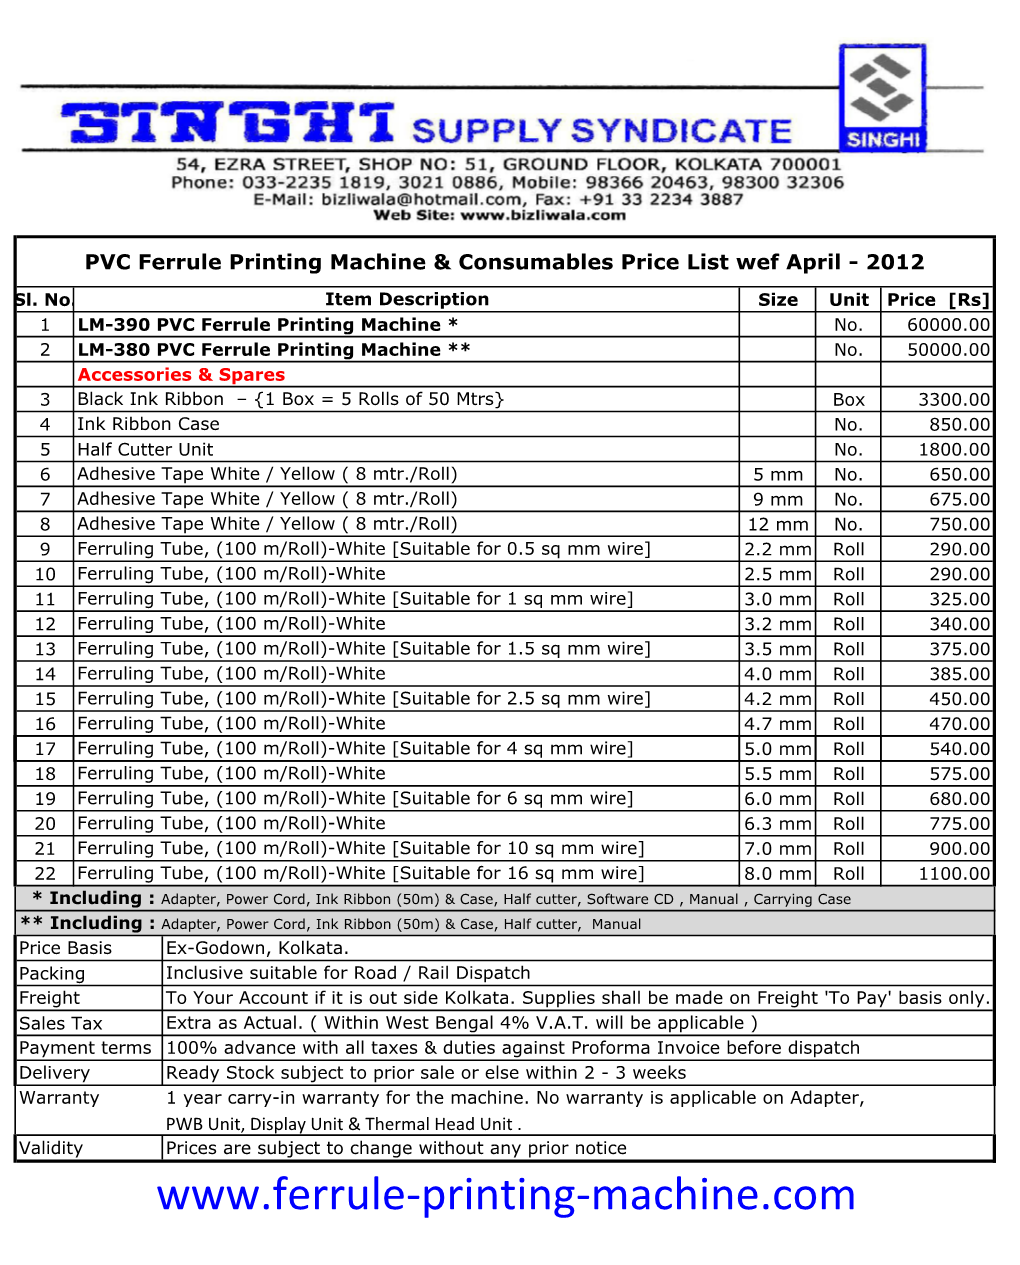 Ferrule Printing Machine & Consumables Price List Wef April - 2012